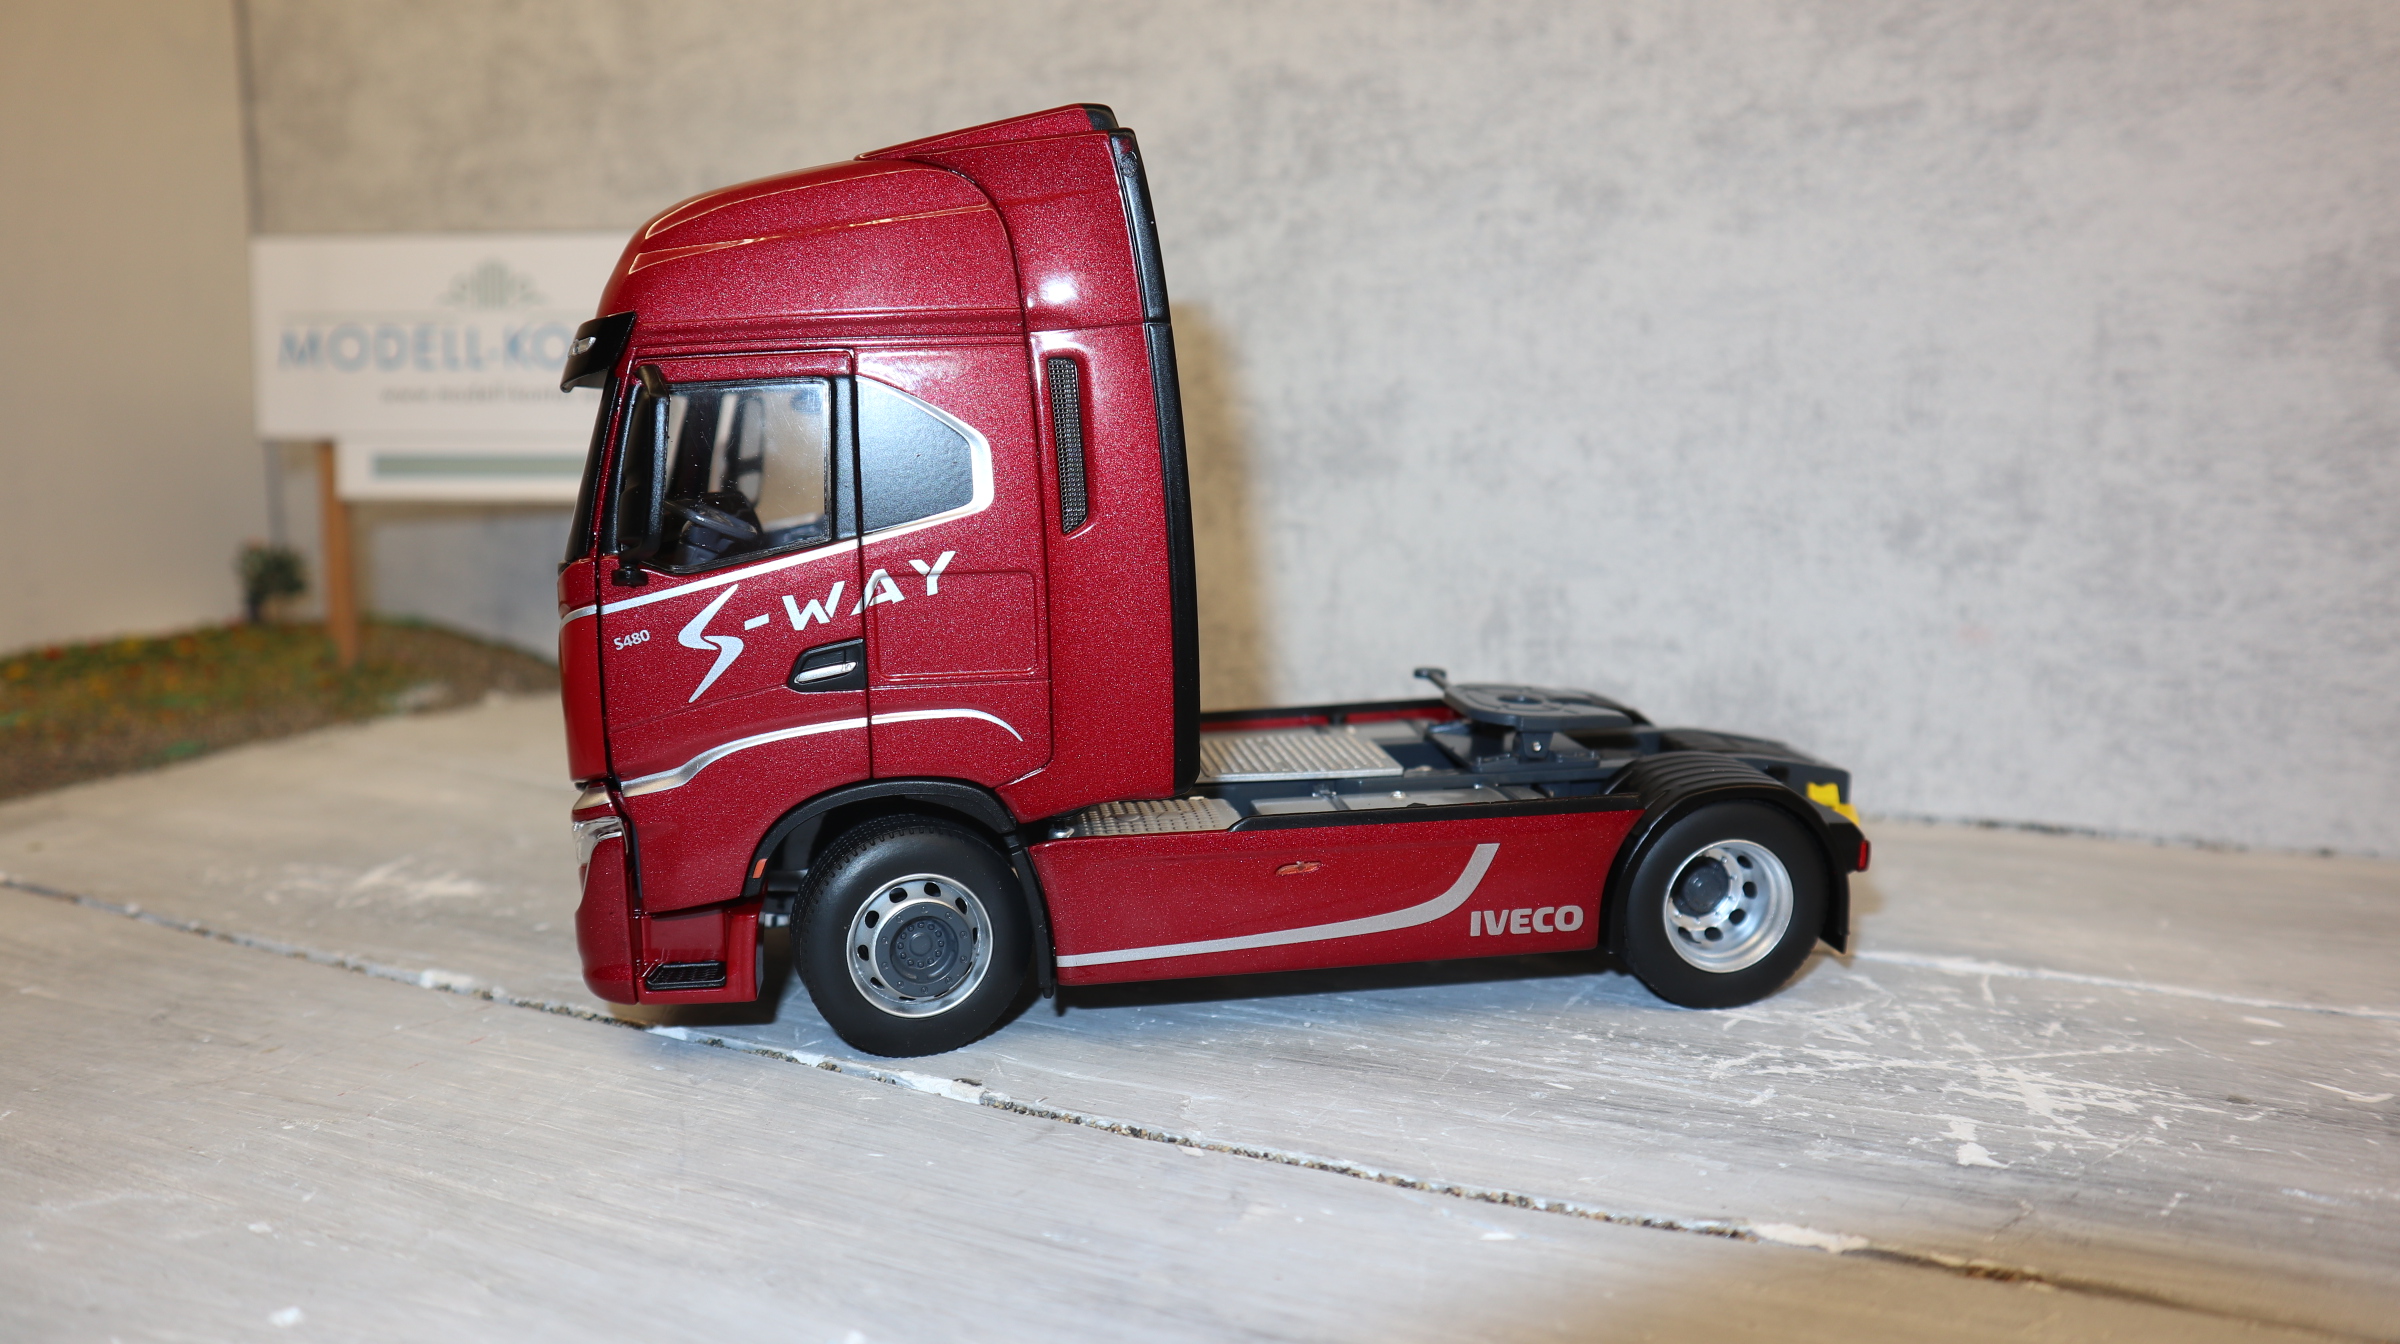 MarGe 2231-03-01 in 1:32, IVECO Stralis S-Way 4x2 rot, NEU in OVP